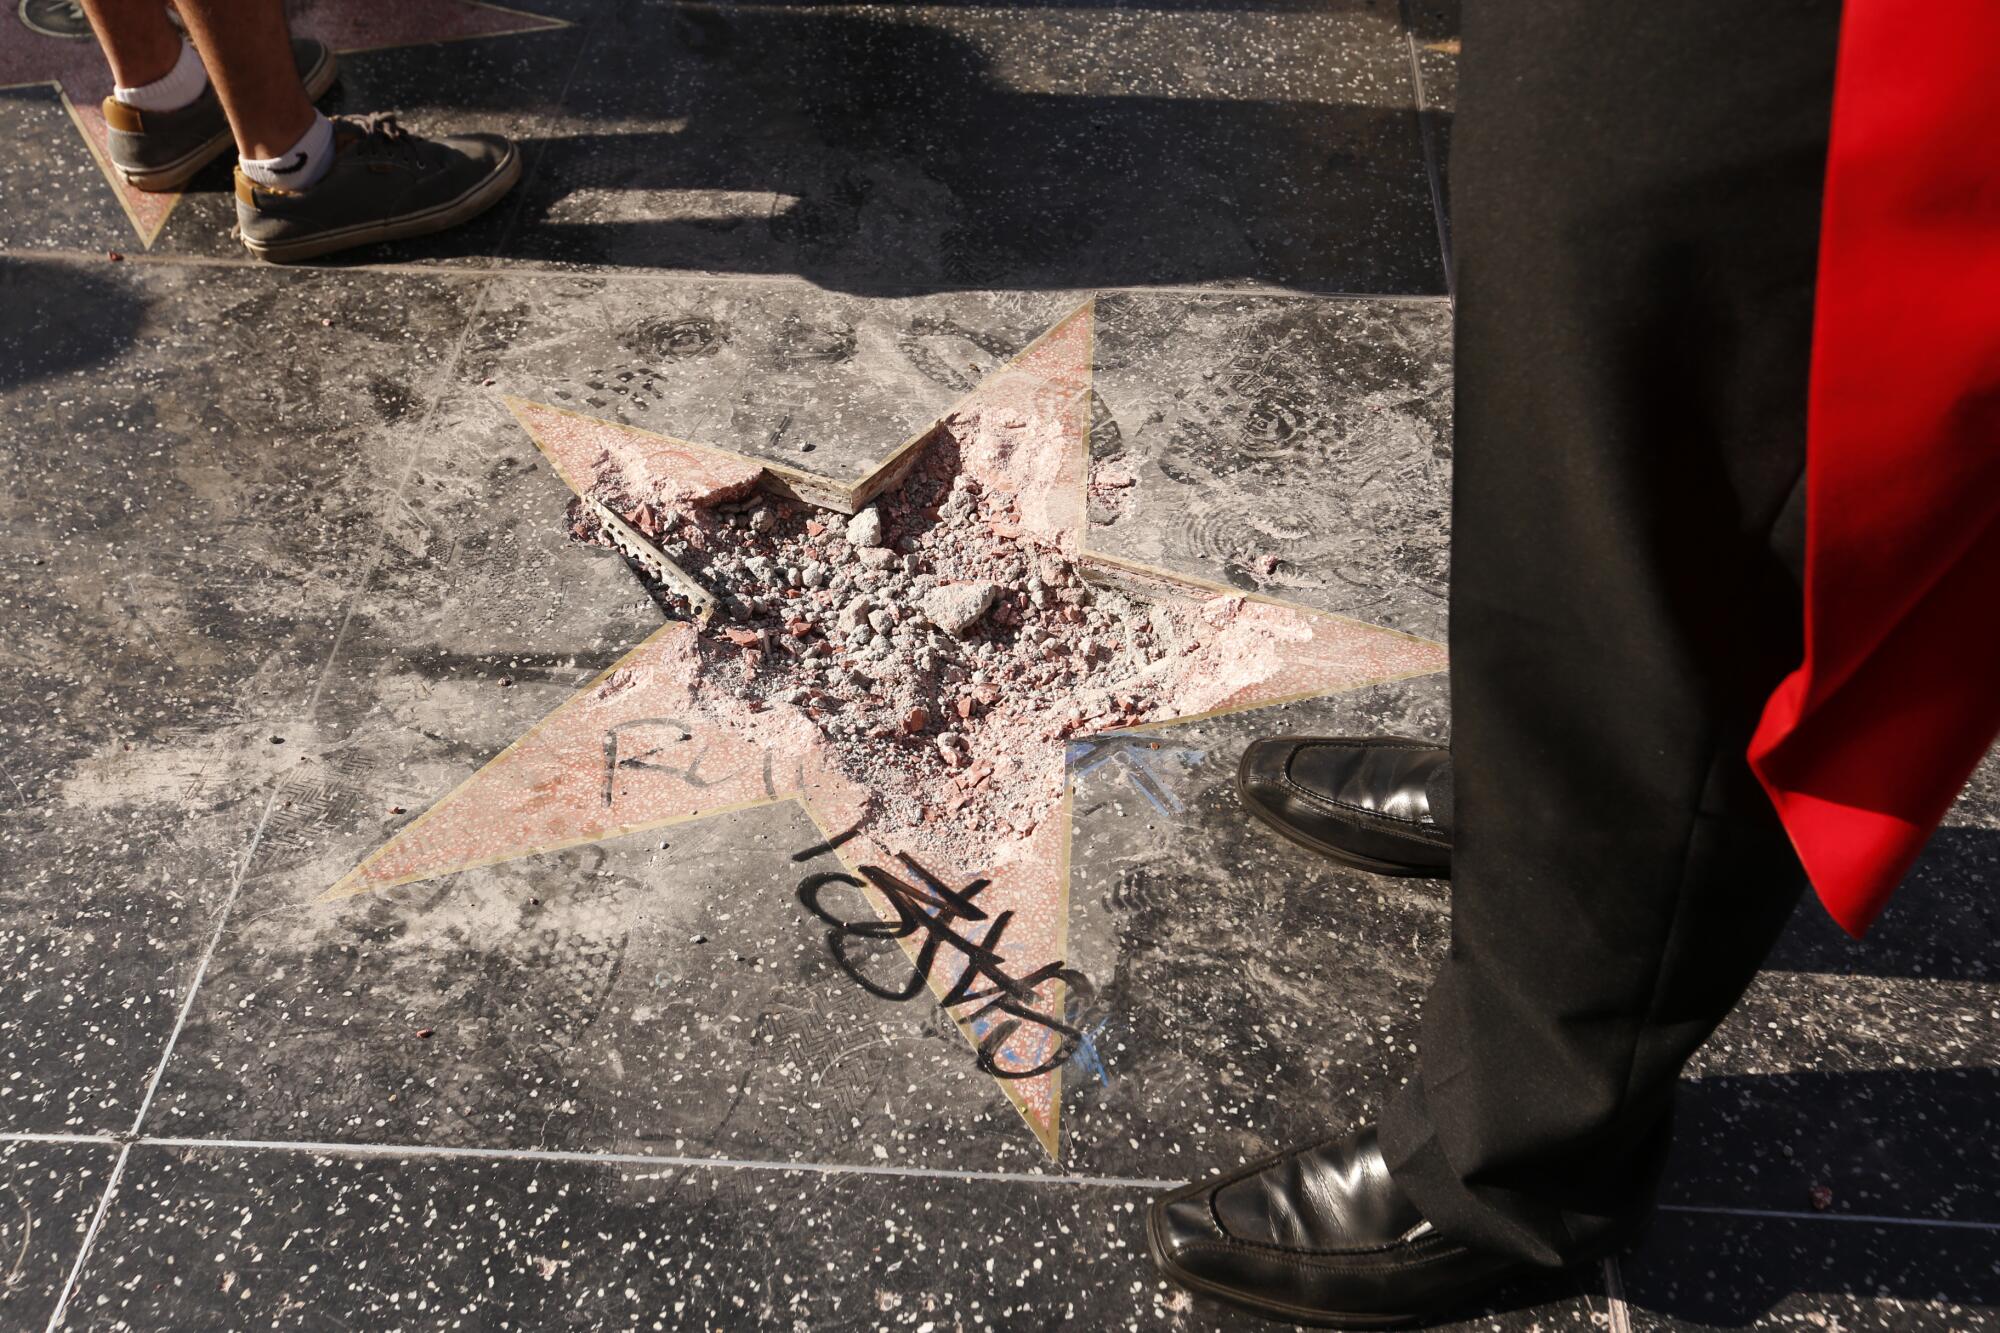 Donald Trump's star on the Hollywood Walk of Fame after it was vandalized in 2018.